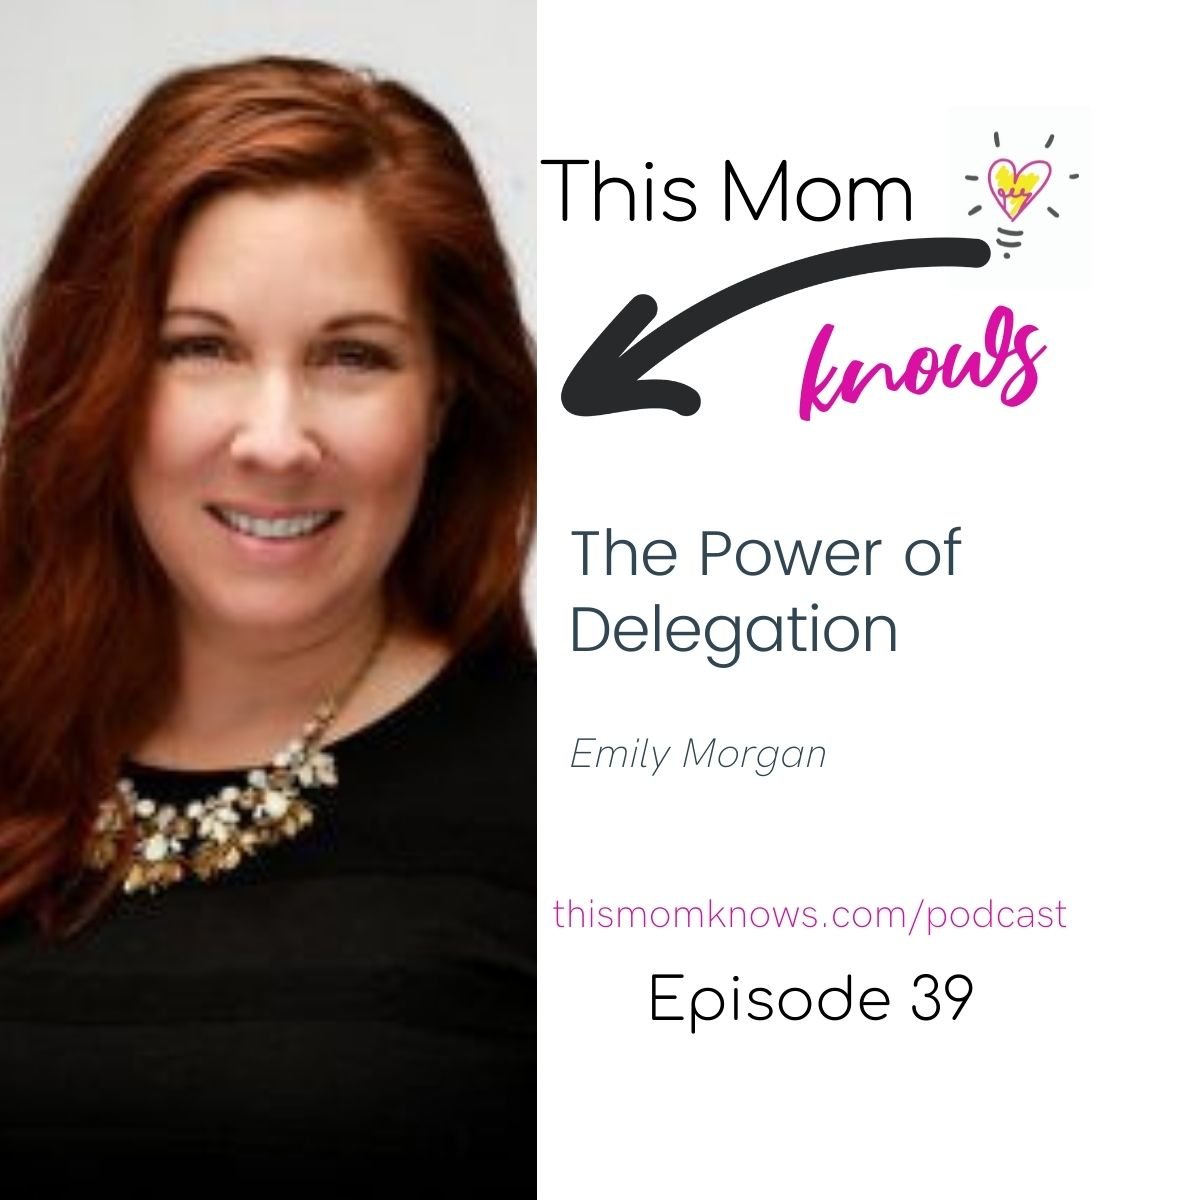 This Mom Knows Podcast